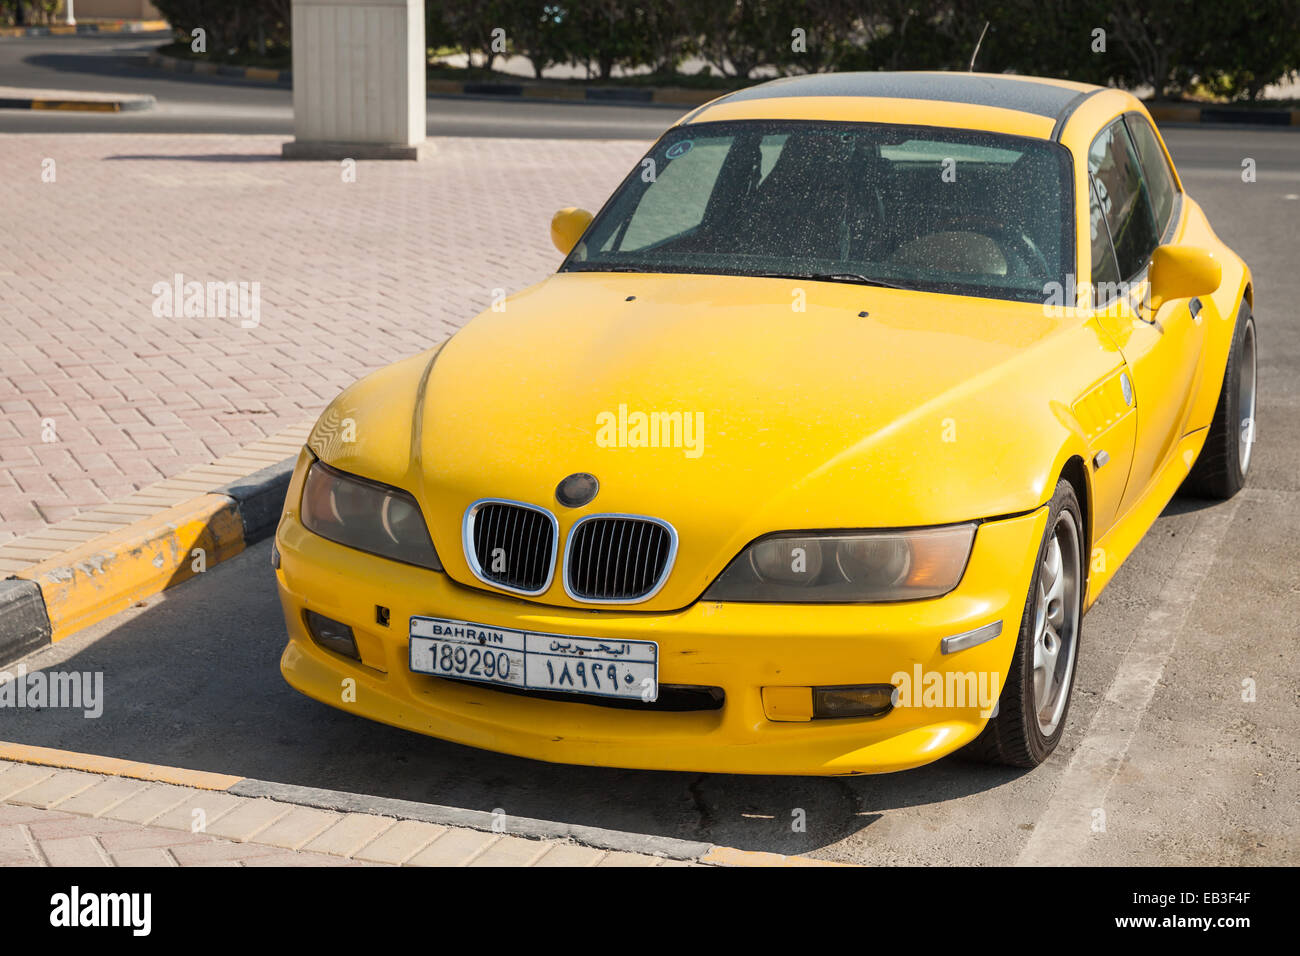 Manama, Bahrain - November 21, 2014: Yellow BMW Z3 M Coupe car is parked on the roadside in Manama Stock Photo